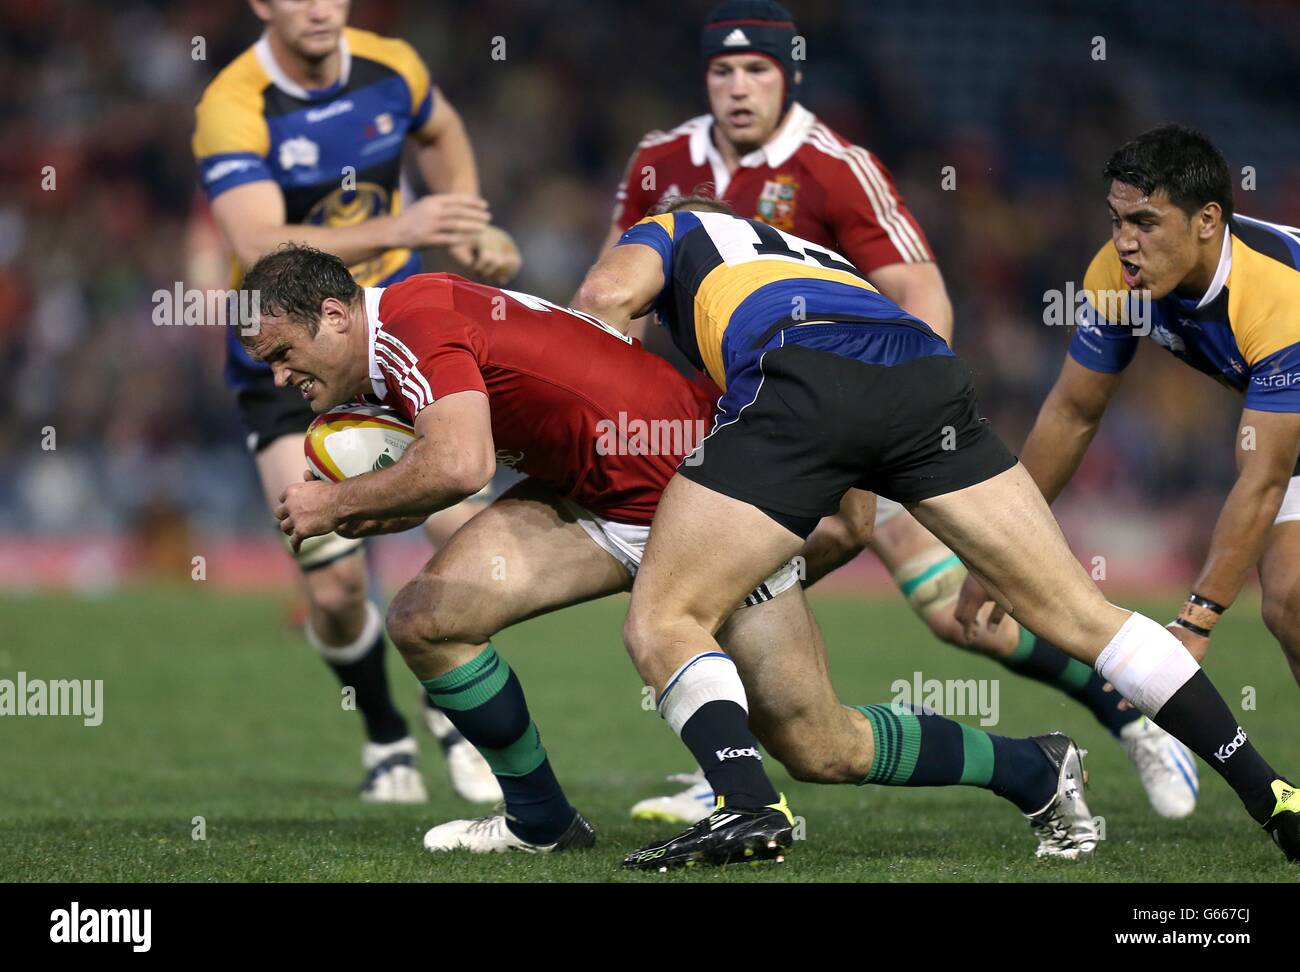 Rugby Union - 2013 British and Irish Lions Tour - NSW-Queensland Country v British & Irish Lions - Hunter Stadium. British & Irish Lions' Jamie Roberts (left) looks to break through the tackle of NSW-Queensland Country's Nathan Trist (centre) Stock Photo